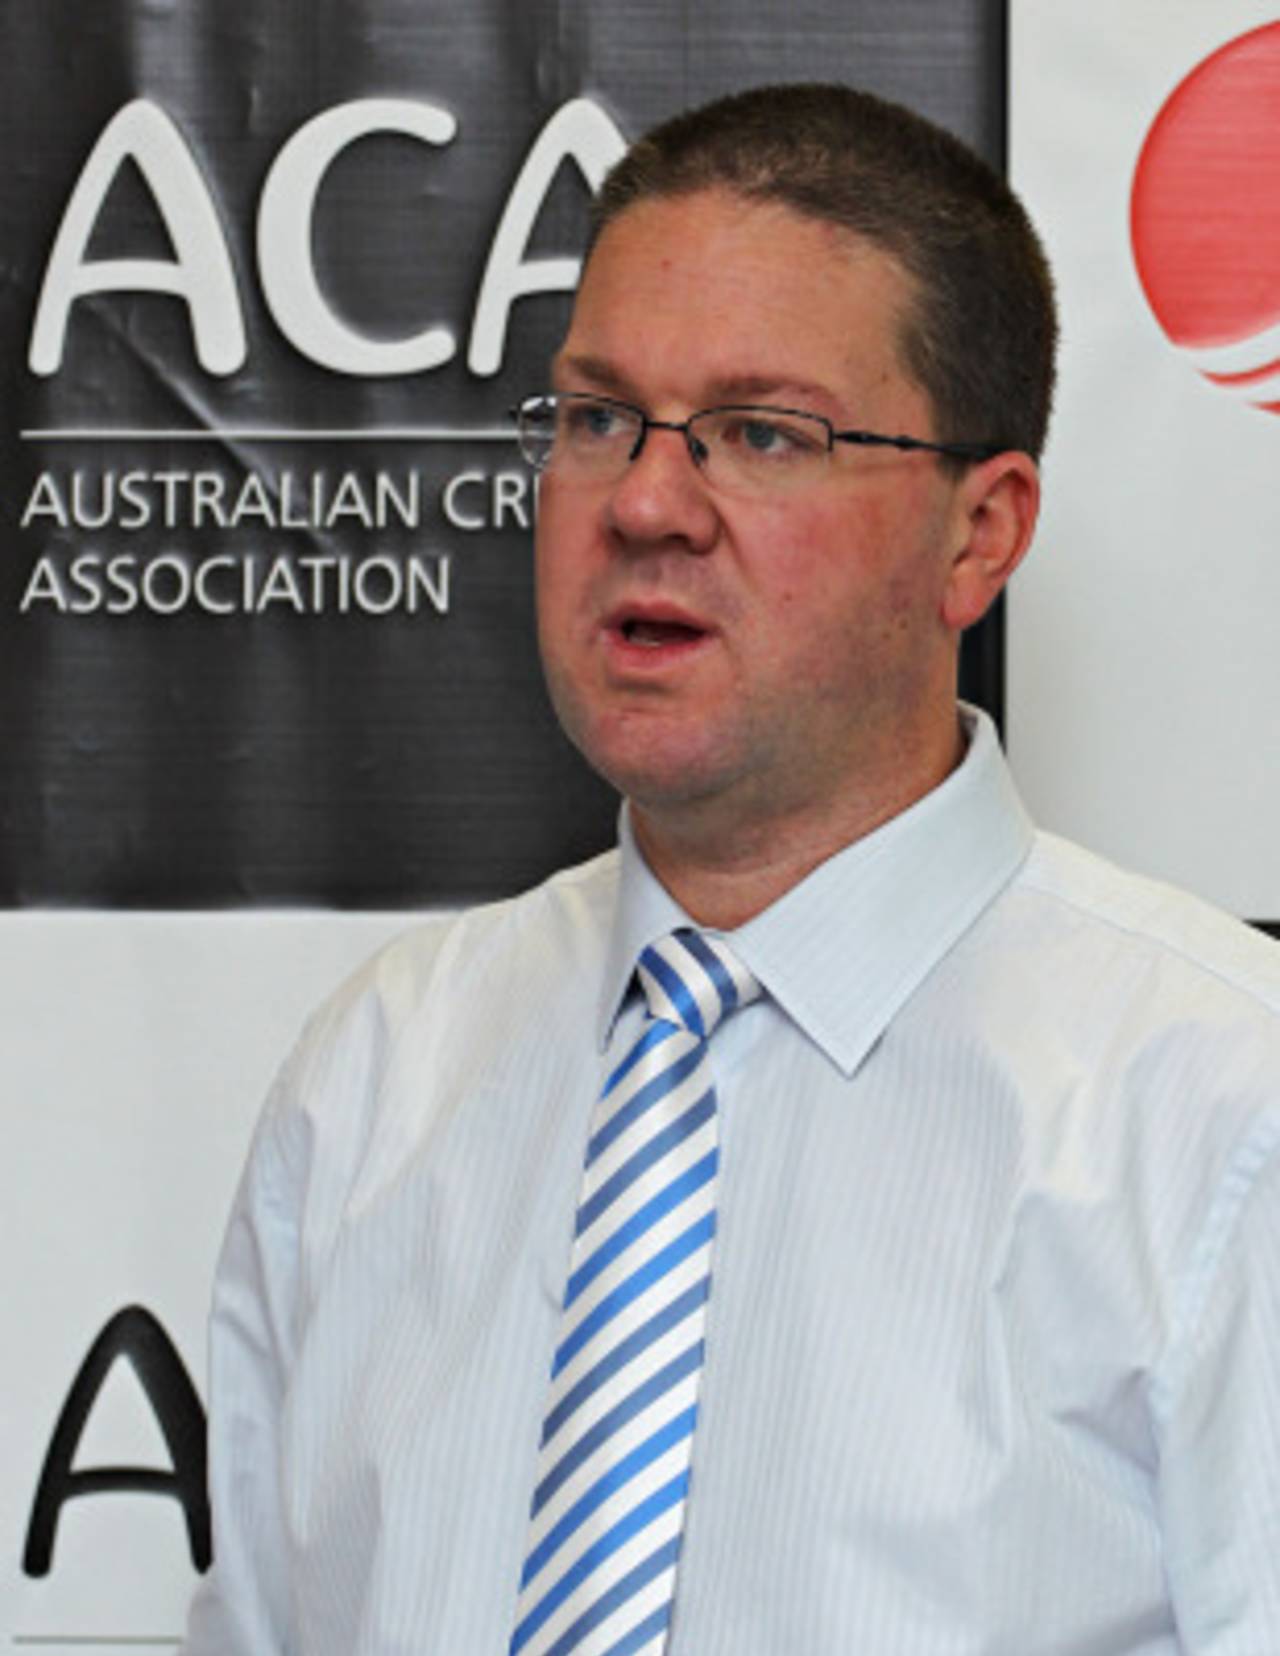 In nine years as ACA chief executive, Paul Marsh oversaw the negotiation of three player payment MOUs with Cricket Australia&nbsp;&nbsp;&bull;&nbsp;&nbsp;Australian Cricketers' Association